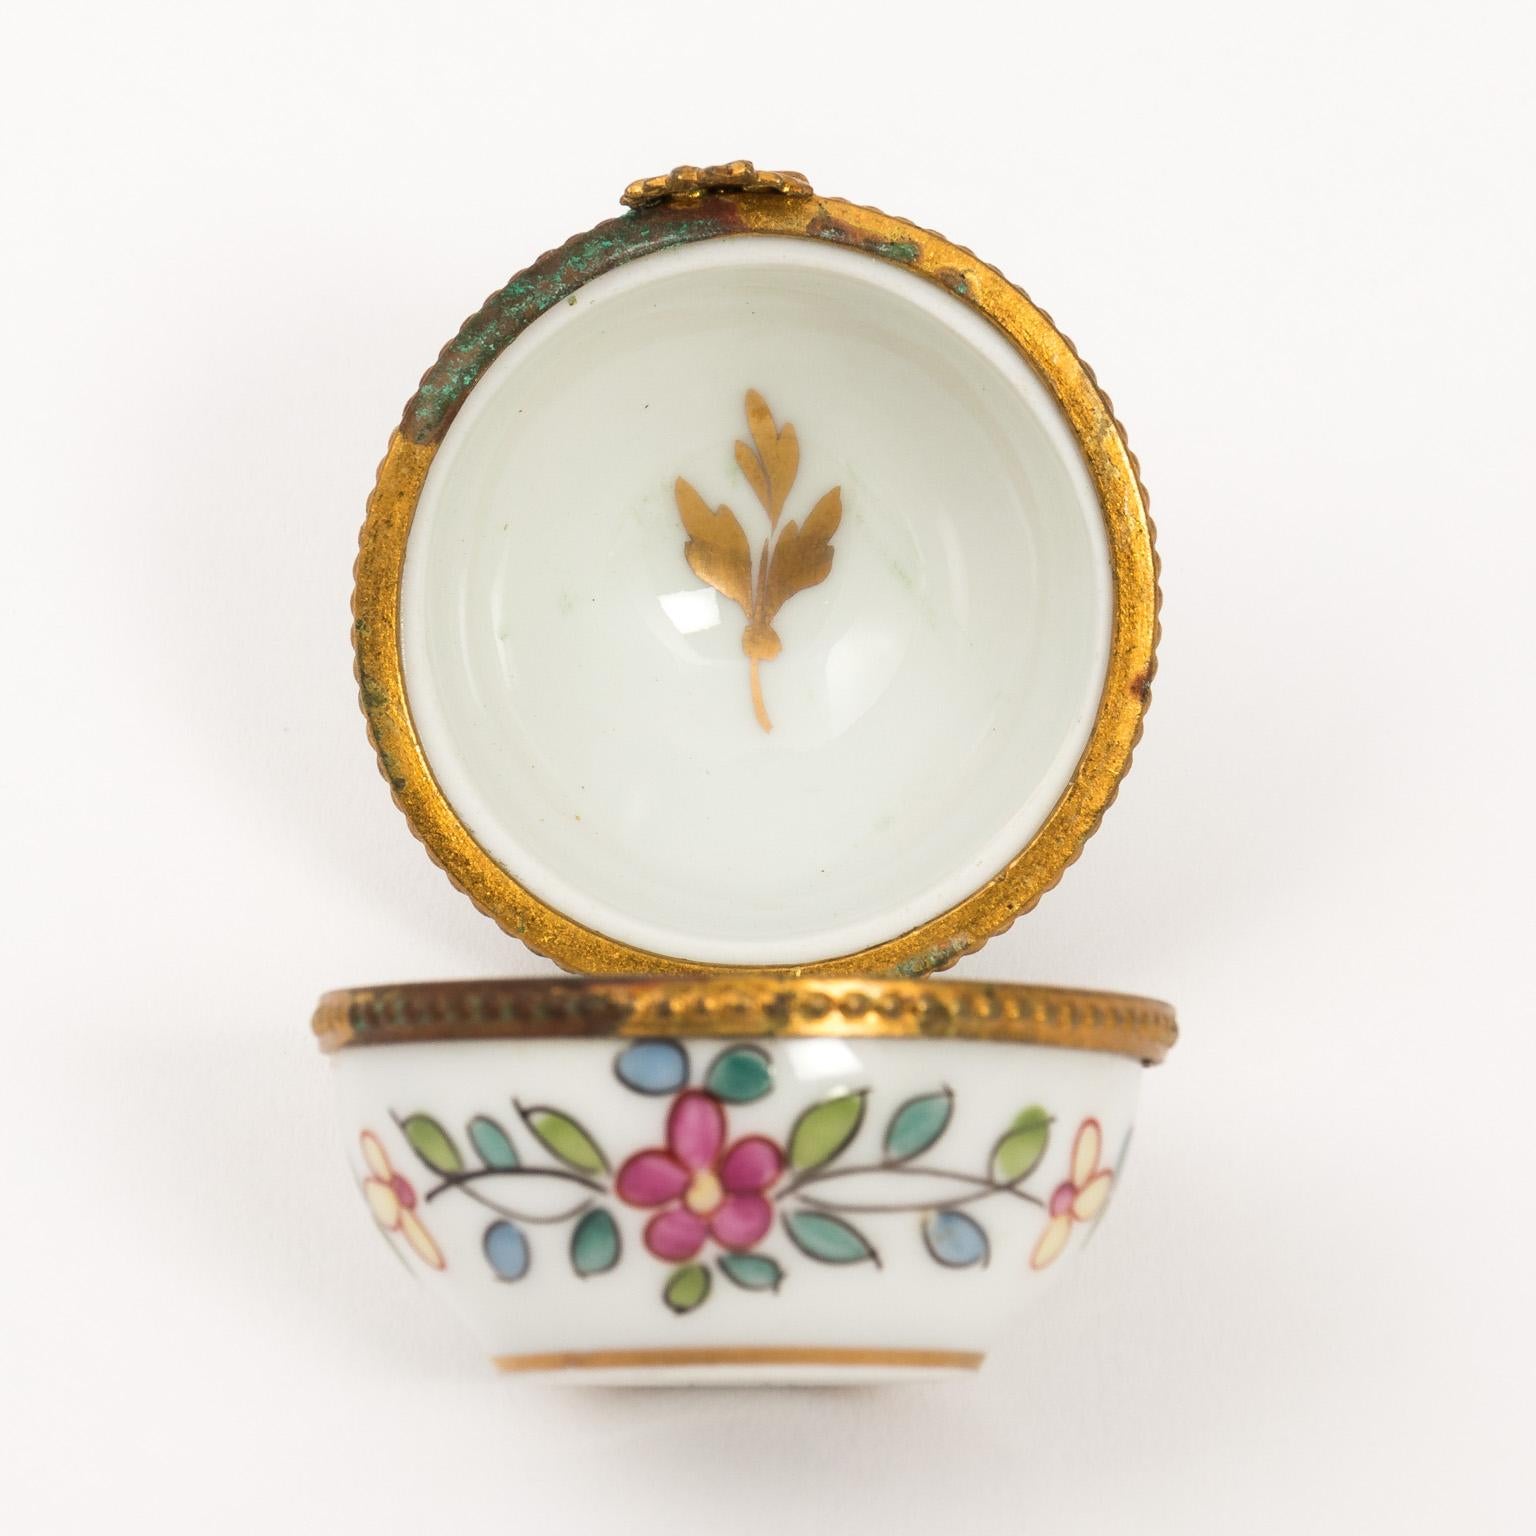 Tiffany & Co. Limoges Hand Painted Porcelain Box 1